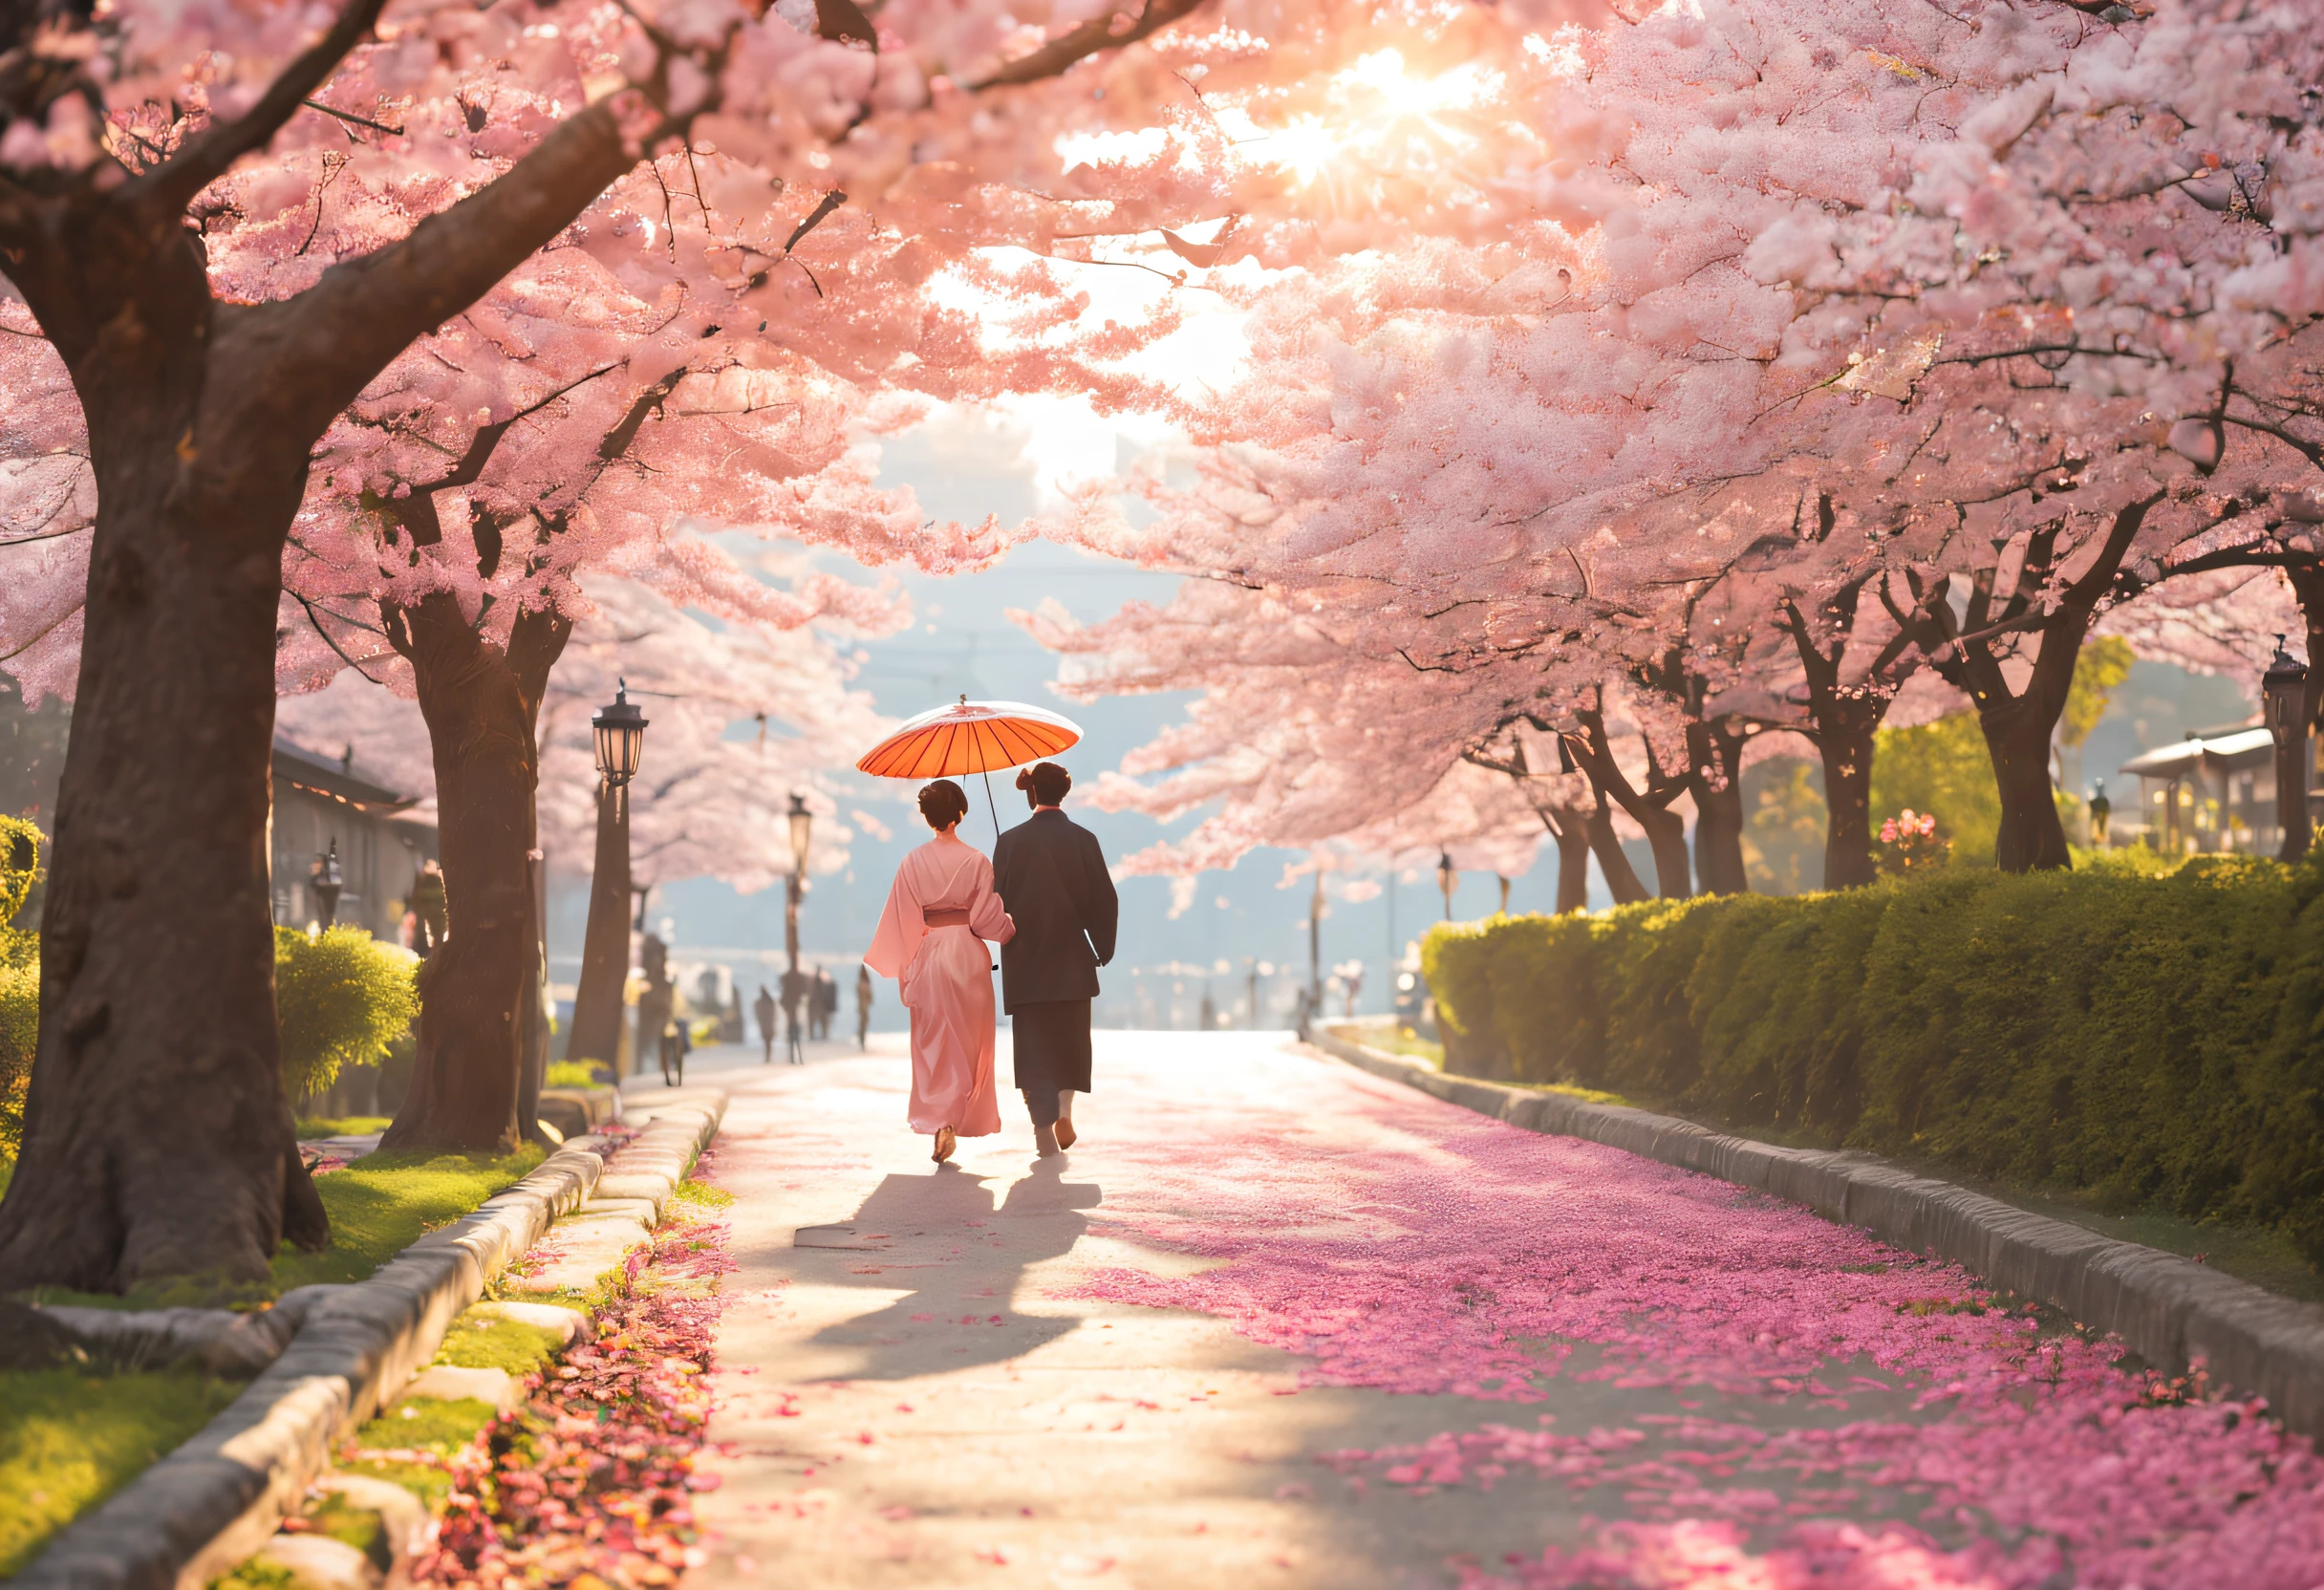 (best quality,4k,8k,highres,masterpiece:1.2),ultra-detailed,(realistic,photorealistic,photo-realistic:1.37),street with cherry blossom trees on the sides,beautiful delicate petals falling softly, sunlight breaking through the branches, gentle breeze rustling the leaves, pink and white flowers blooming vibrantly,picturesque view of the avenue, people strolling along the sidewalk, colorful kimonos and parasols, sense of tranquility and serenity, traditional Japanese atmosphere, soft pastel tones, warm golden sunlight, ethereal and dream-like ambiance